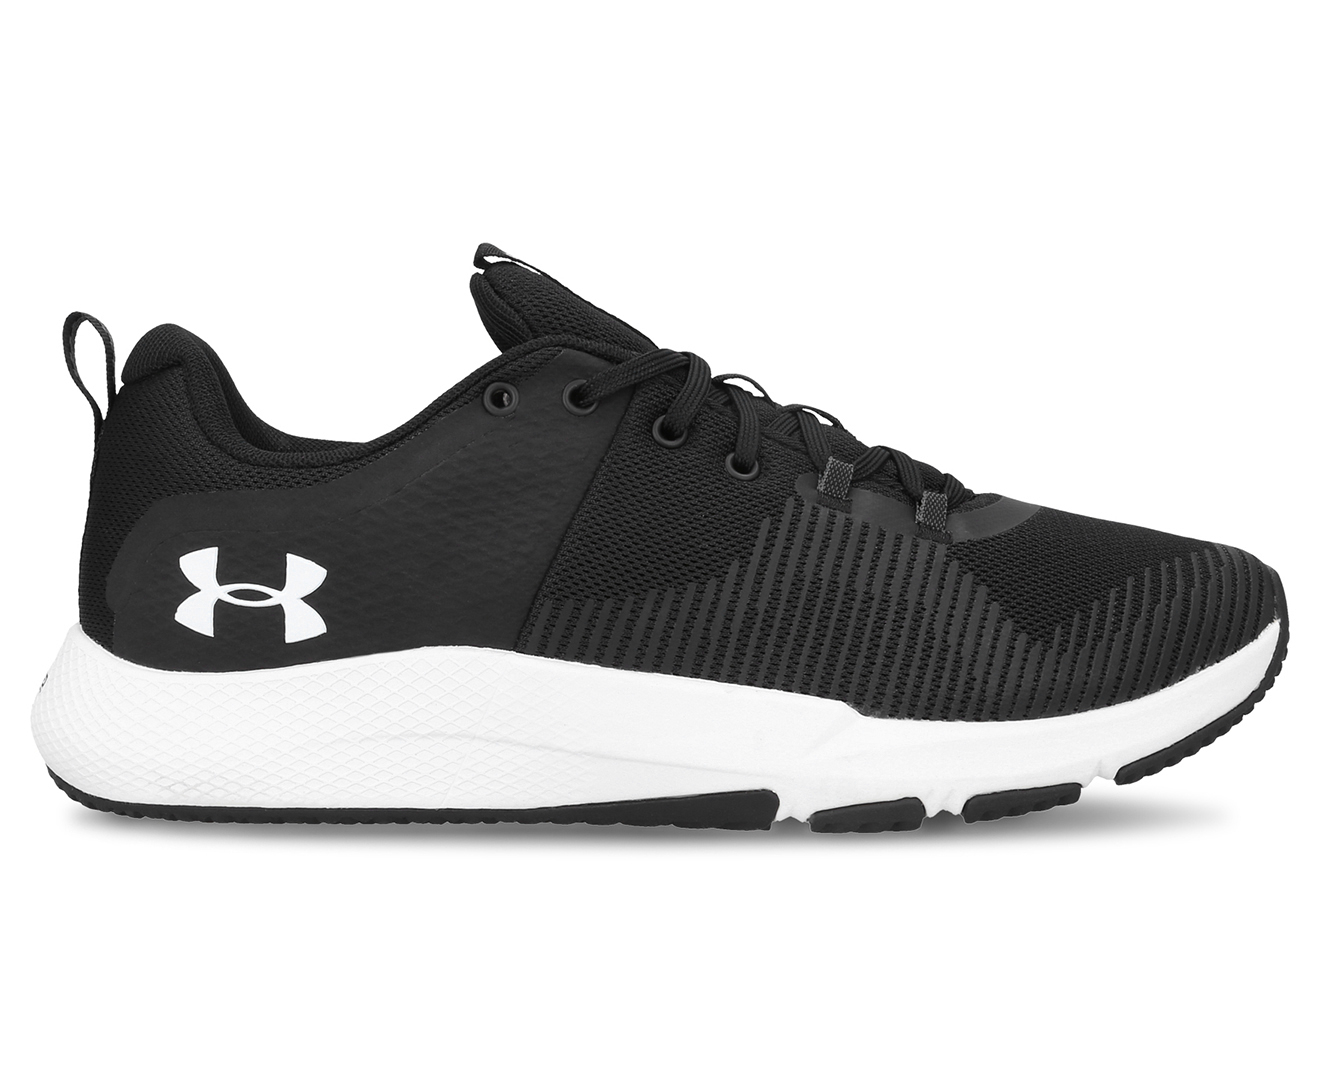 Under Armour Men's Charged Engage Training Shoes - Black/White | Catch ...